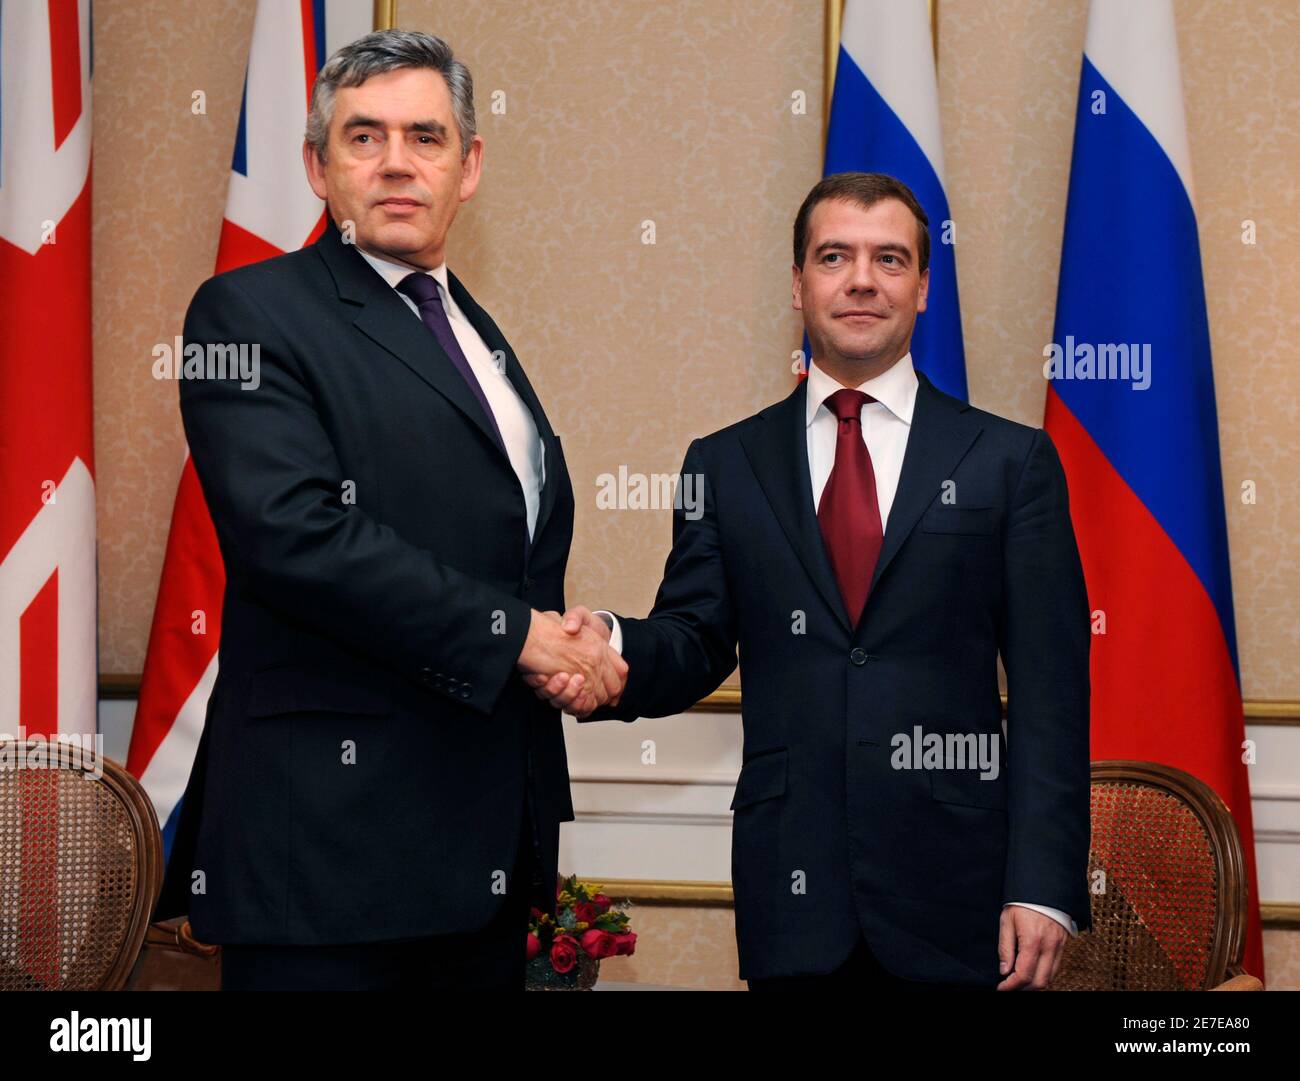 British Prime Minister Gordon Brown (L) shakes hands with Russian President Dmitry Medvedev at a bilateral meeting after the Summit on Financial Markets and the World Economy in Washington, November 15, 2008.    REUTERS/Mike Theiler (UNITED STATES) Stock Photo